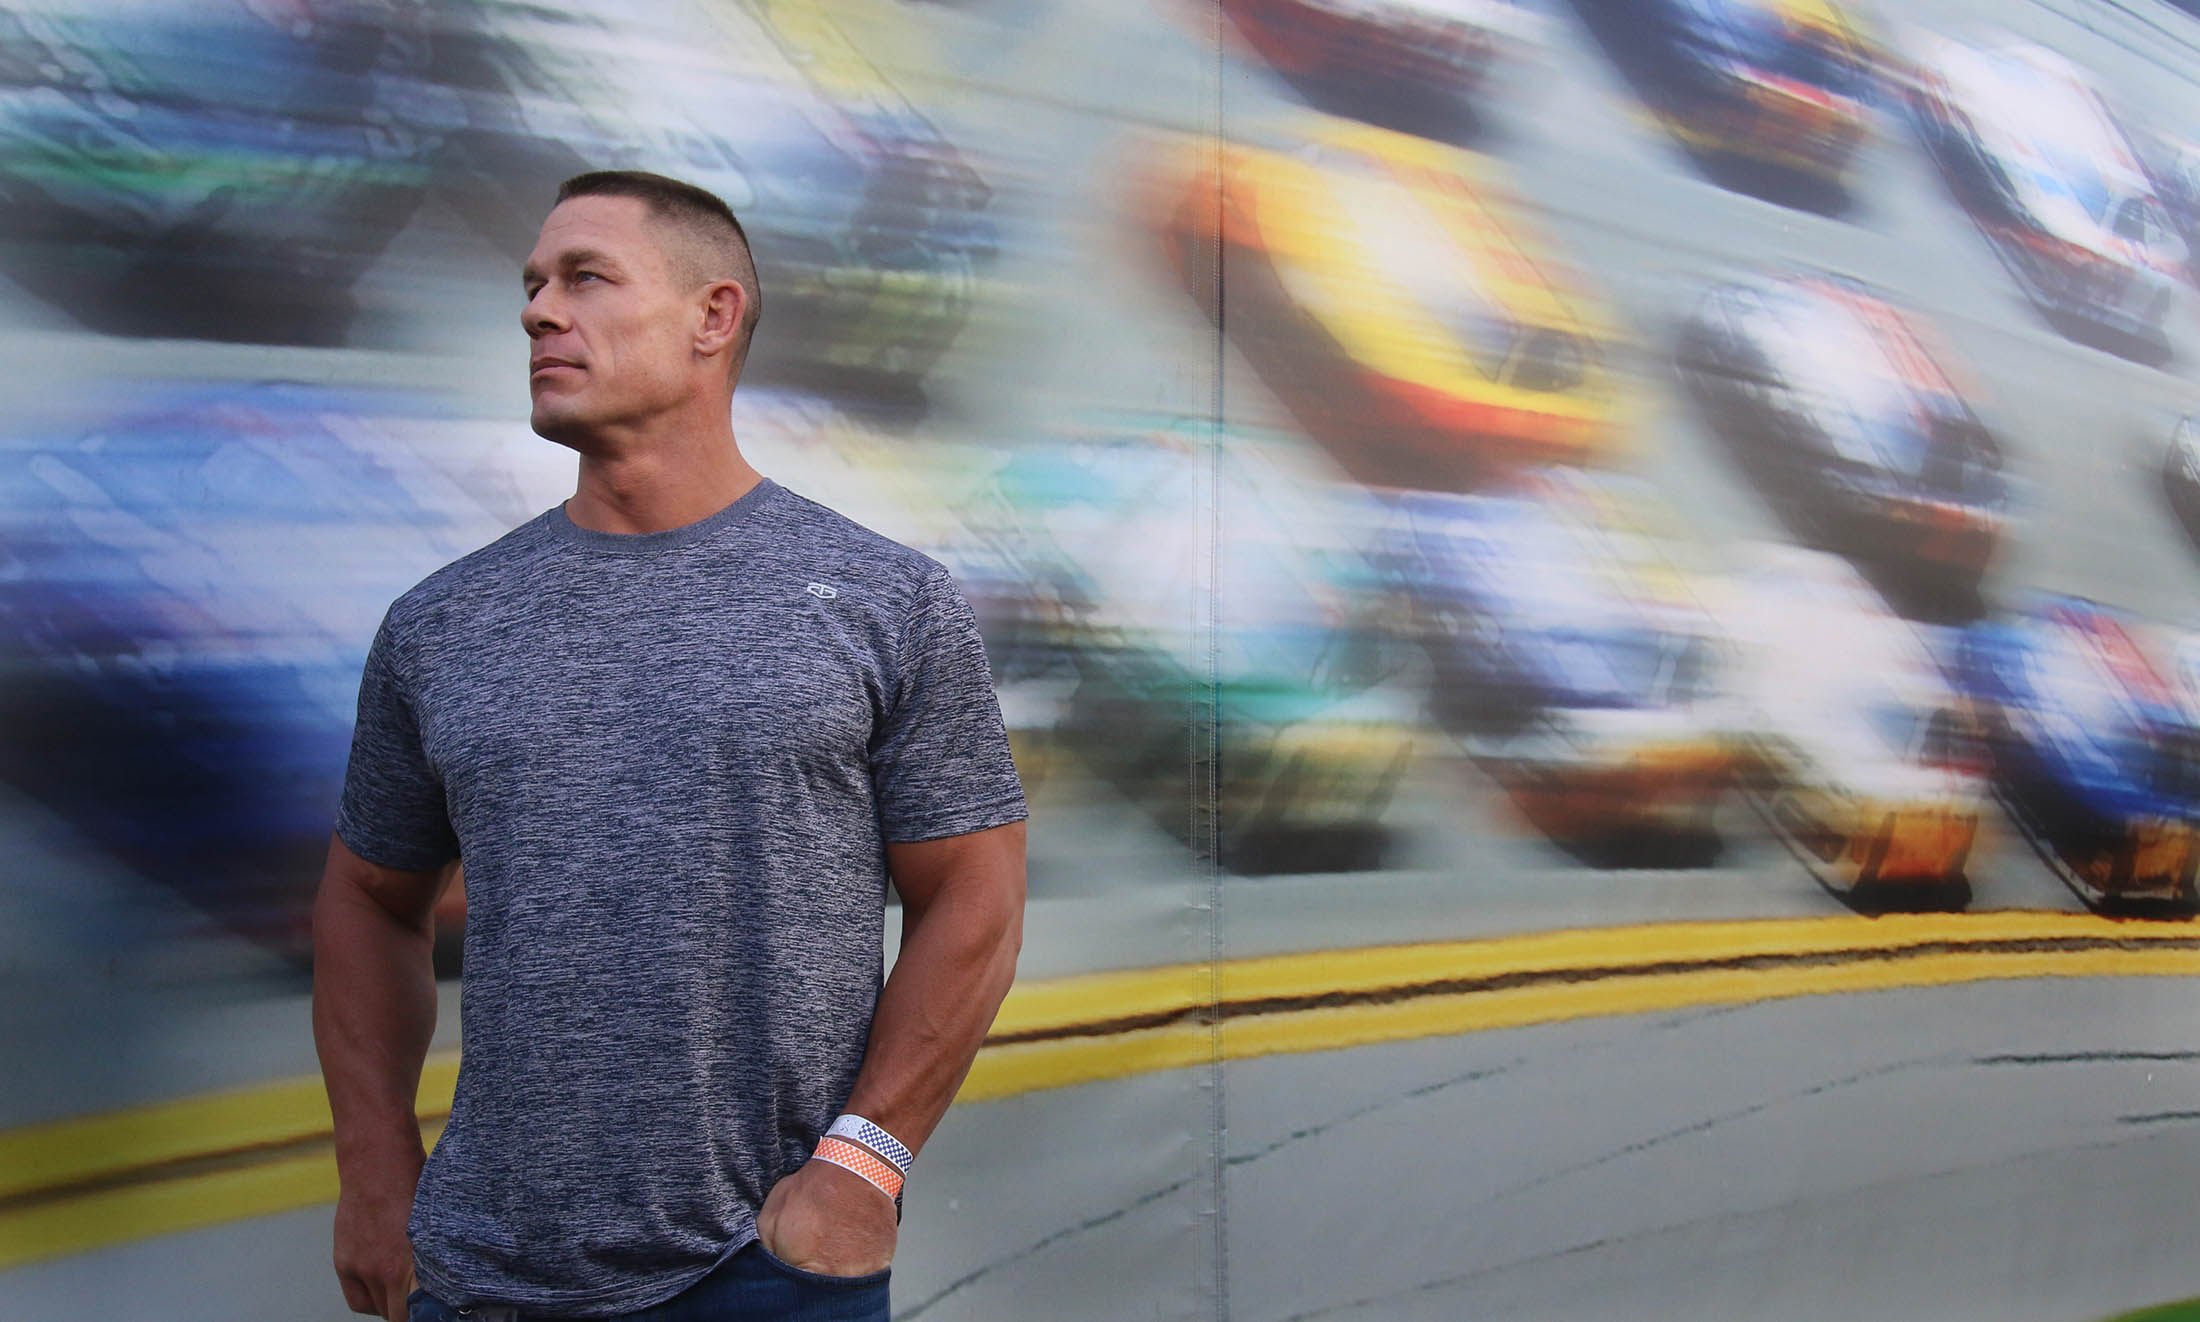 WWE wrestler John Cena joins the cast for Fast and Furious 9 along with an outrageous lineup of rare and ultra-fast cars. Photo: @jtillervision/Twitter